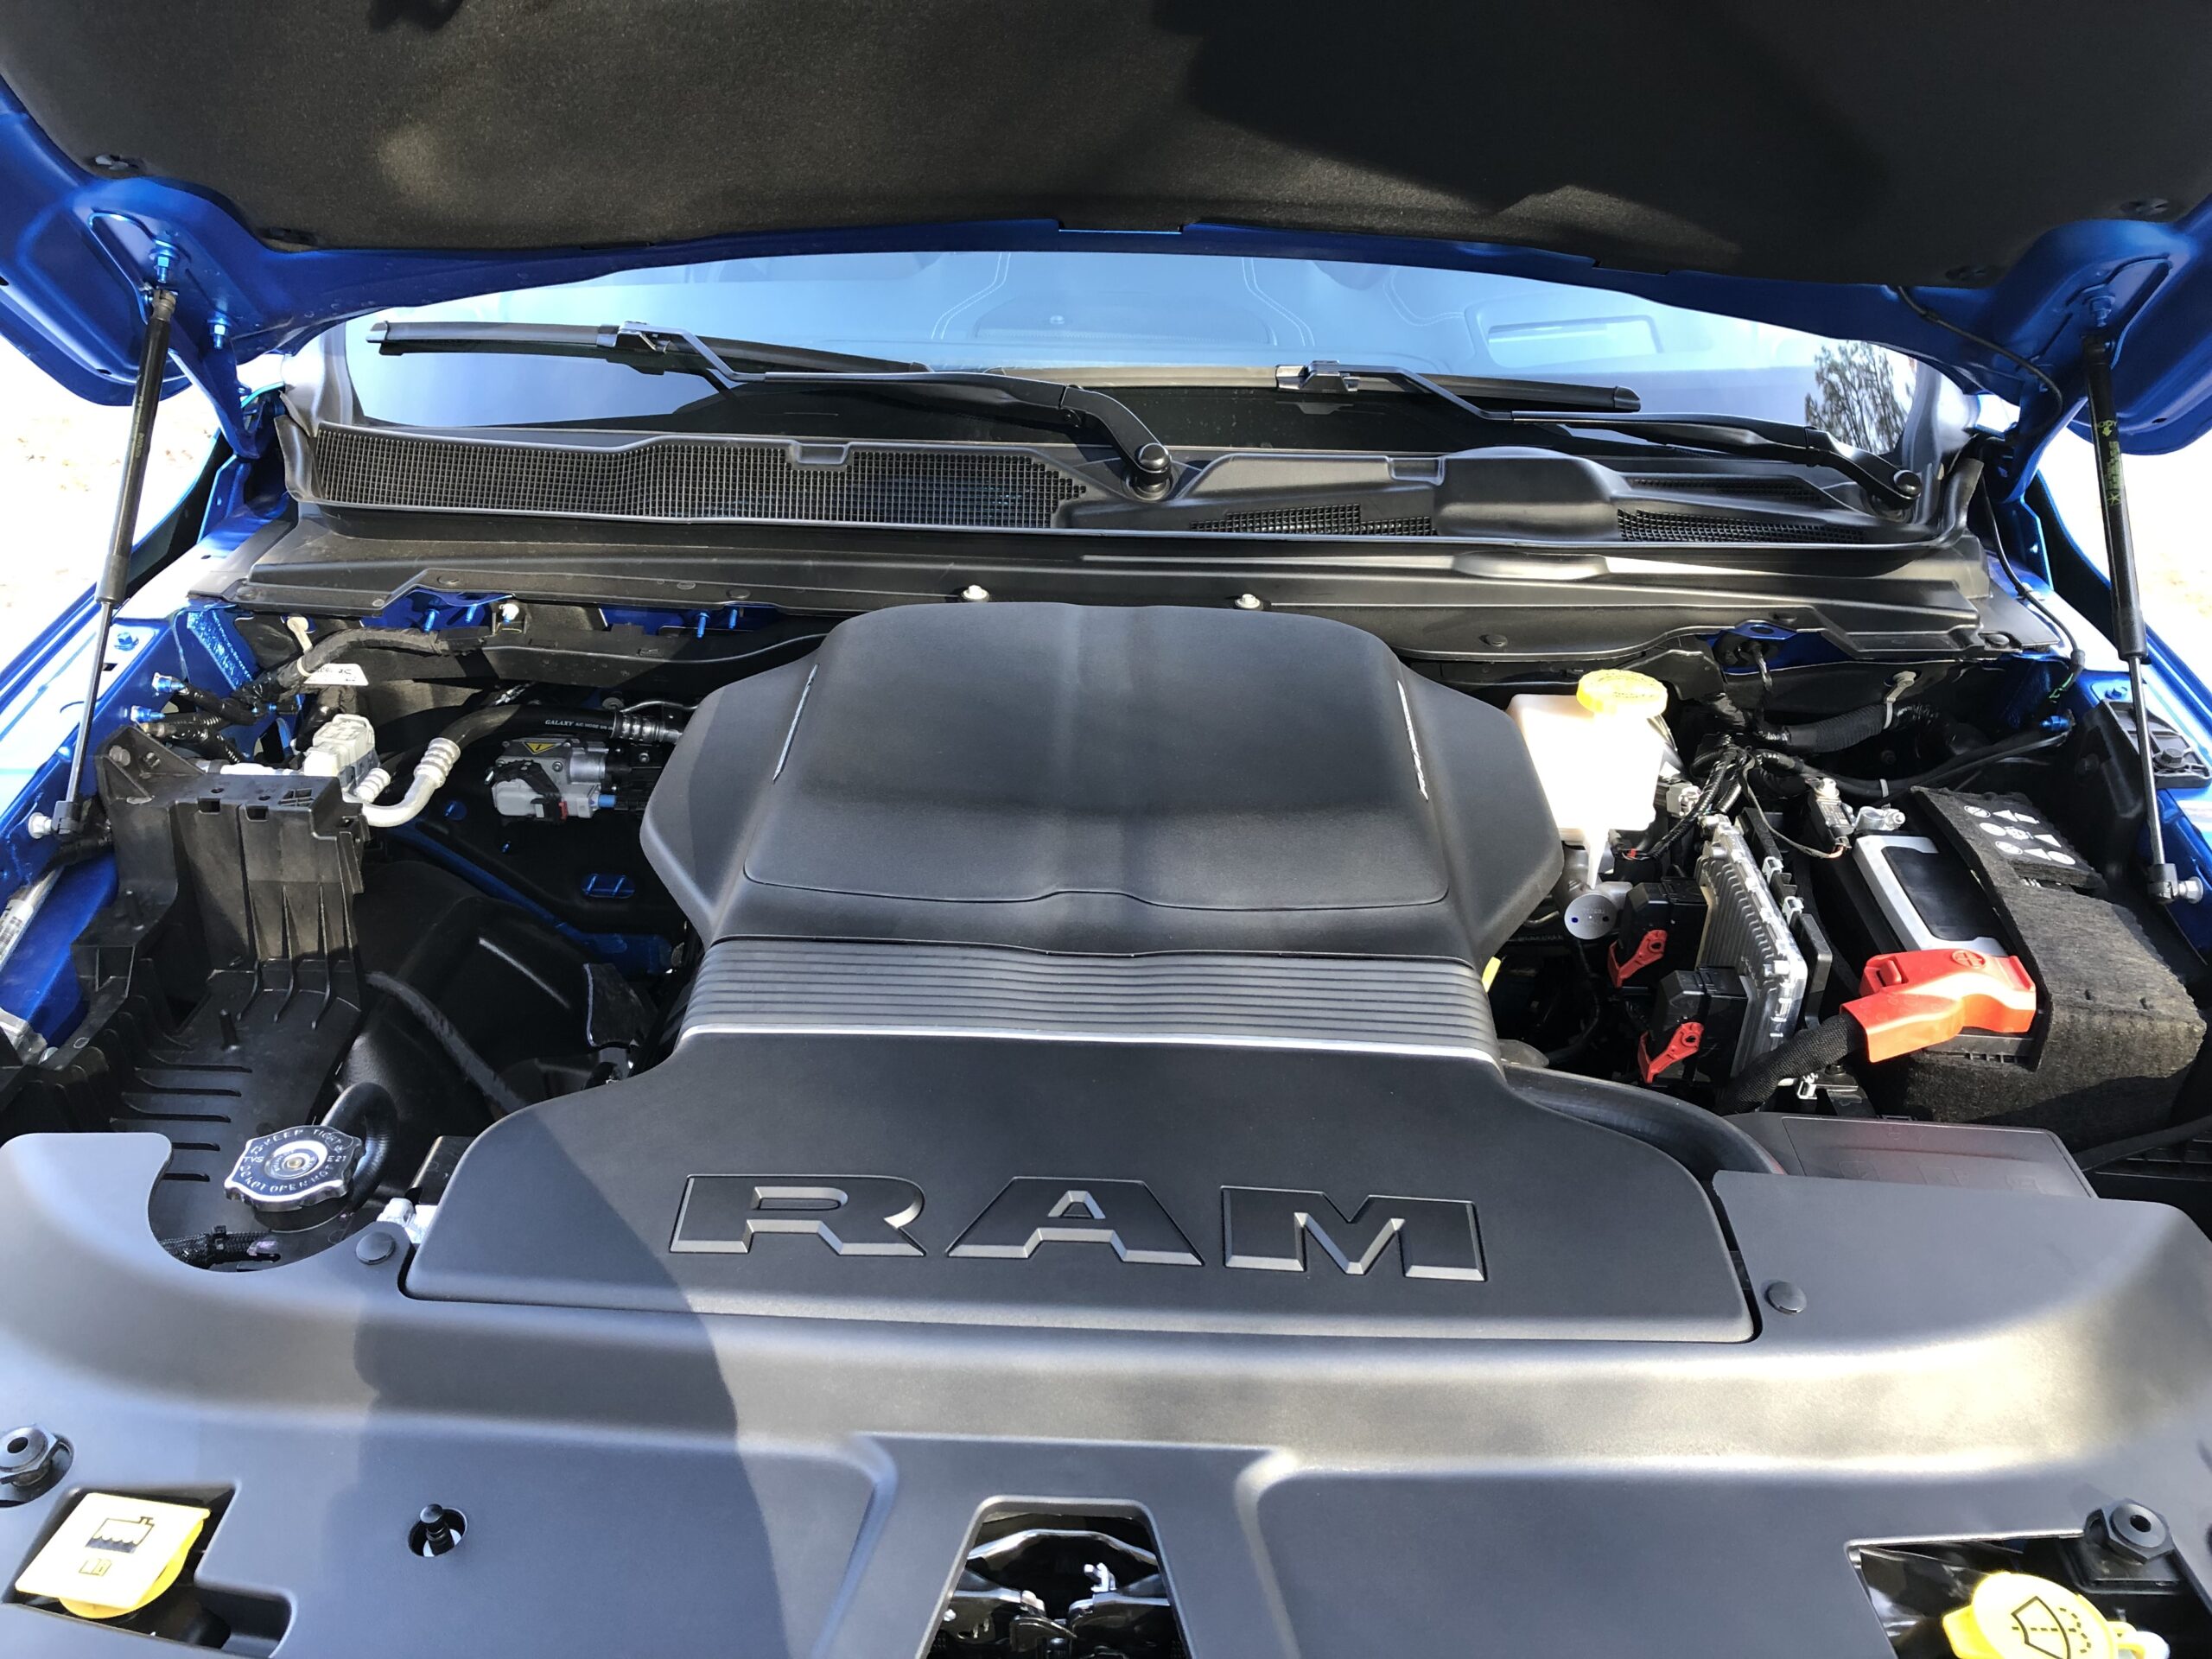 The Hemi engine delivers power.